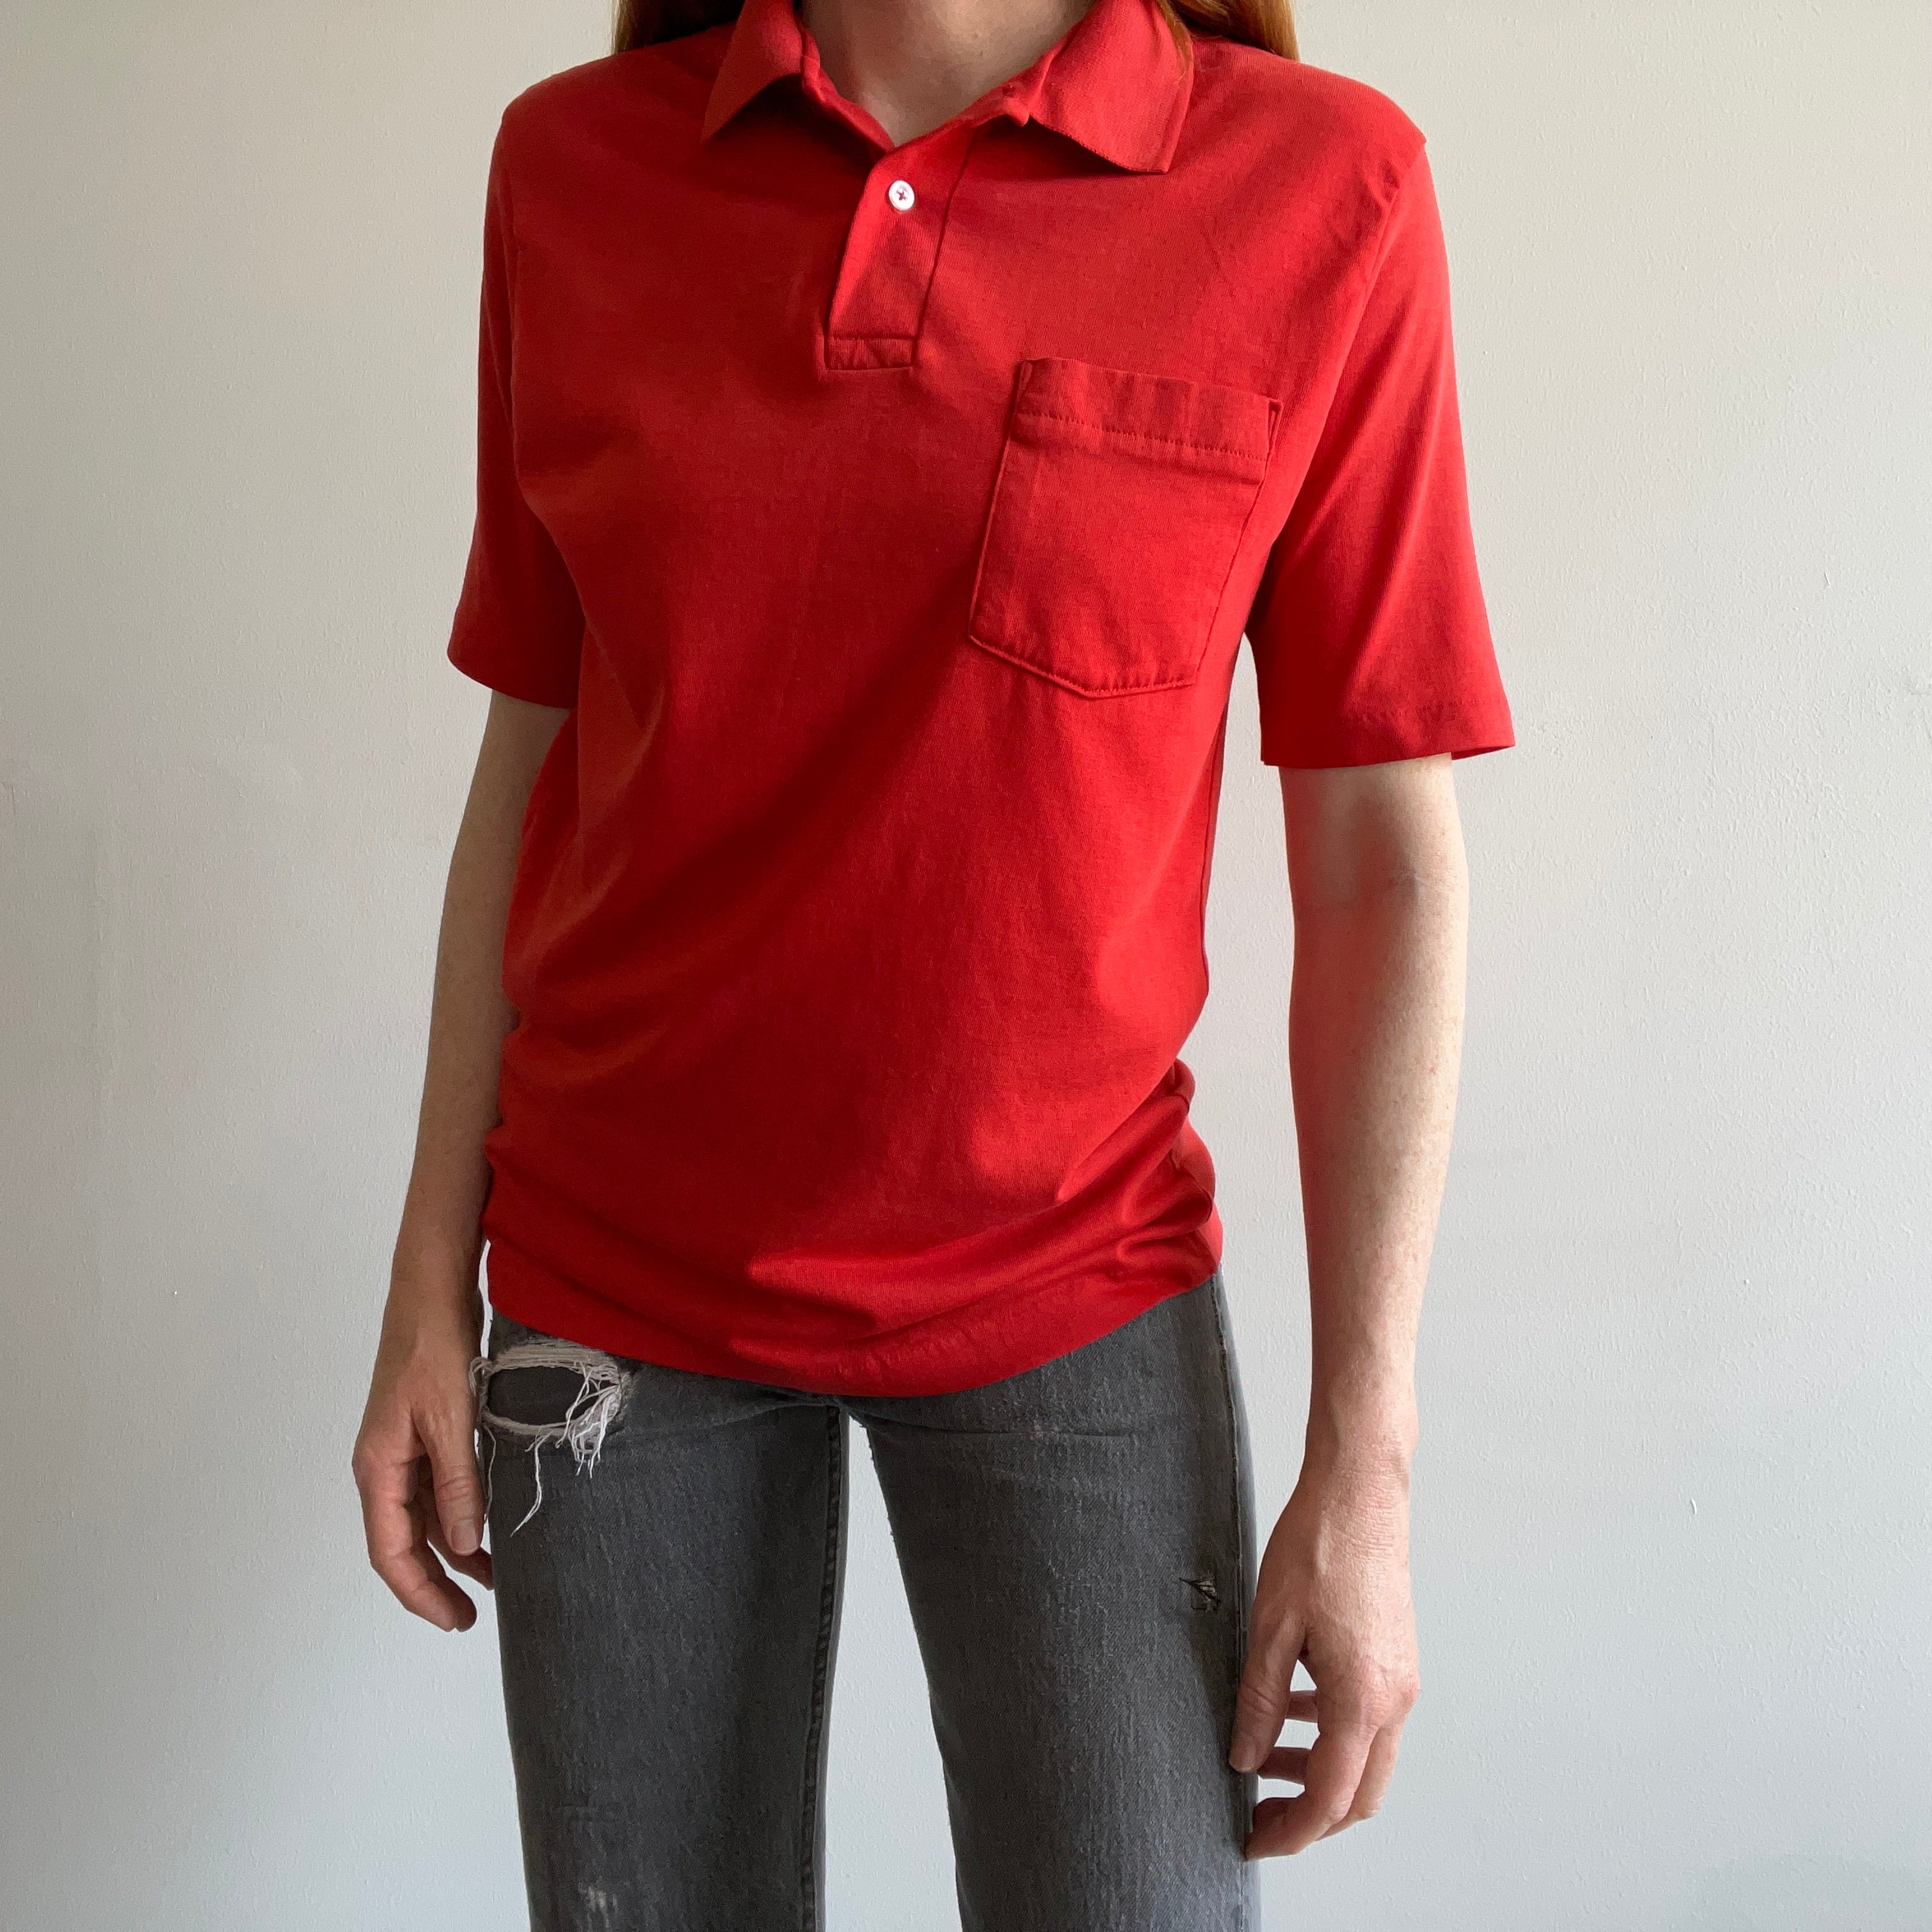 1980s Silky Jersey Polo Shirt with a Backside